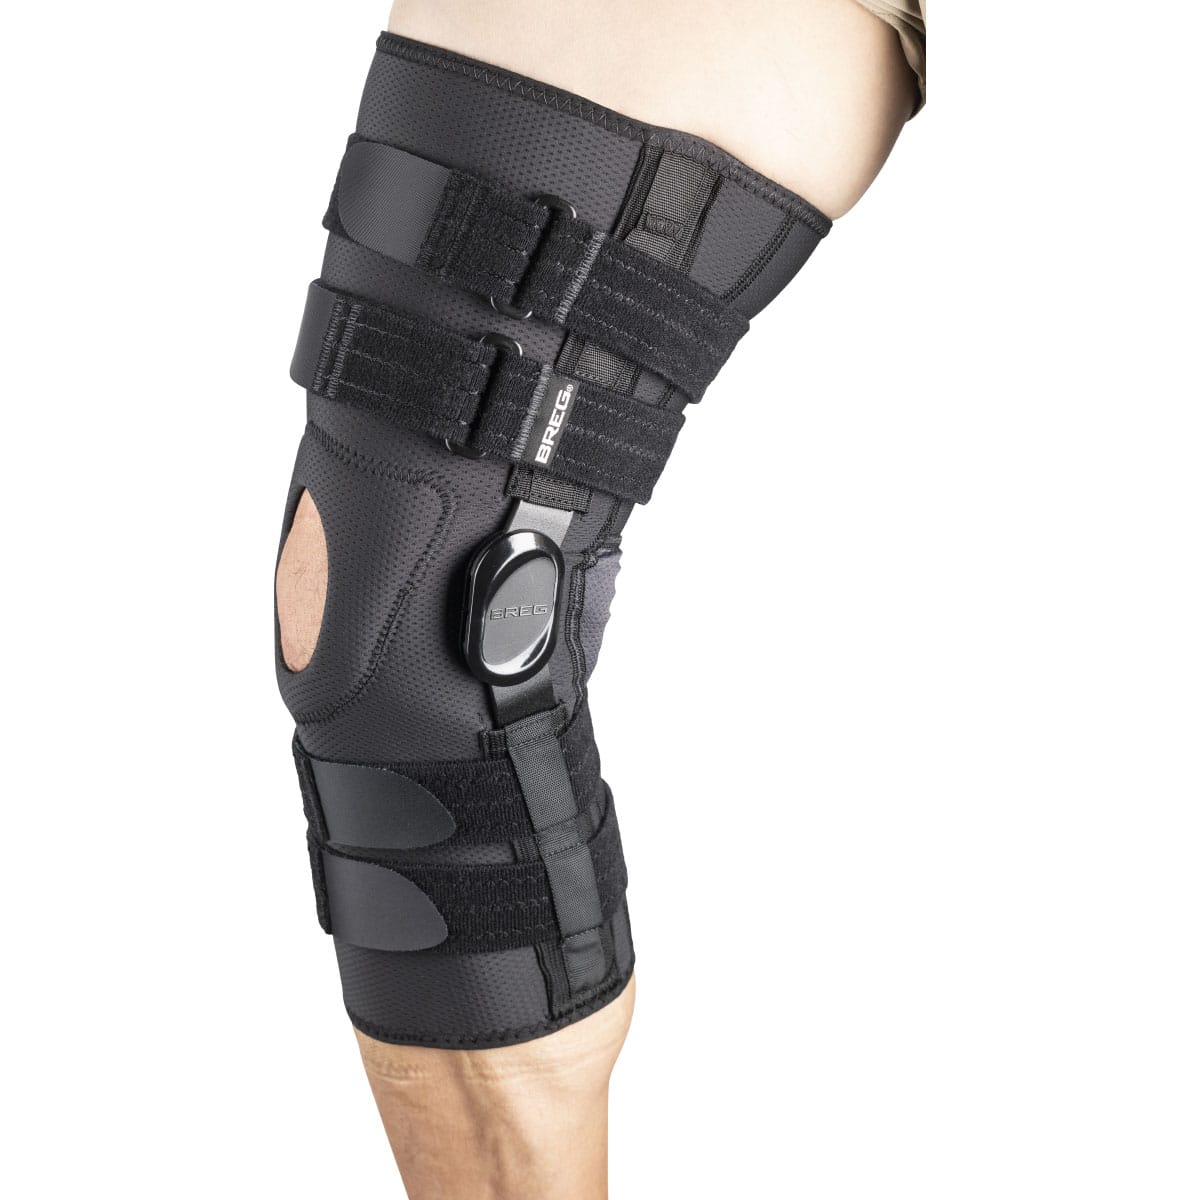 Knee Support, Knee Hyperextension Brace, Adjustable Fixed Knee Orthosis  Acl, Pcl, Osteoarthritis, Recovery After Op